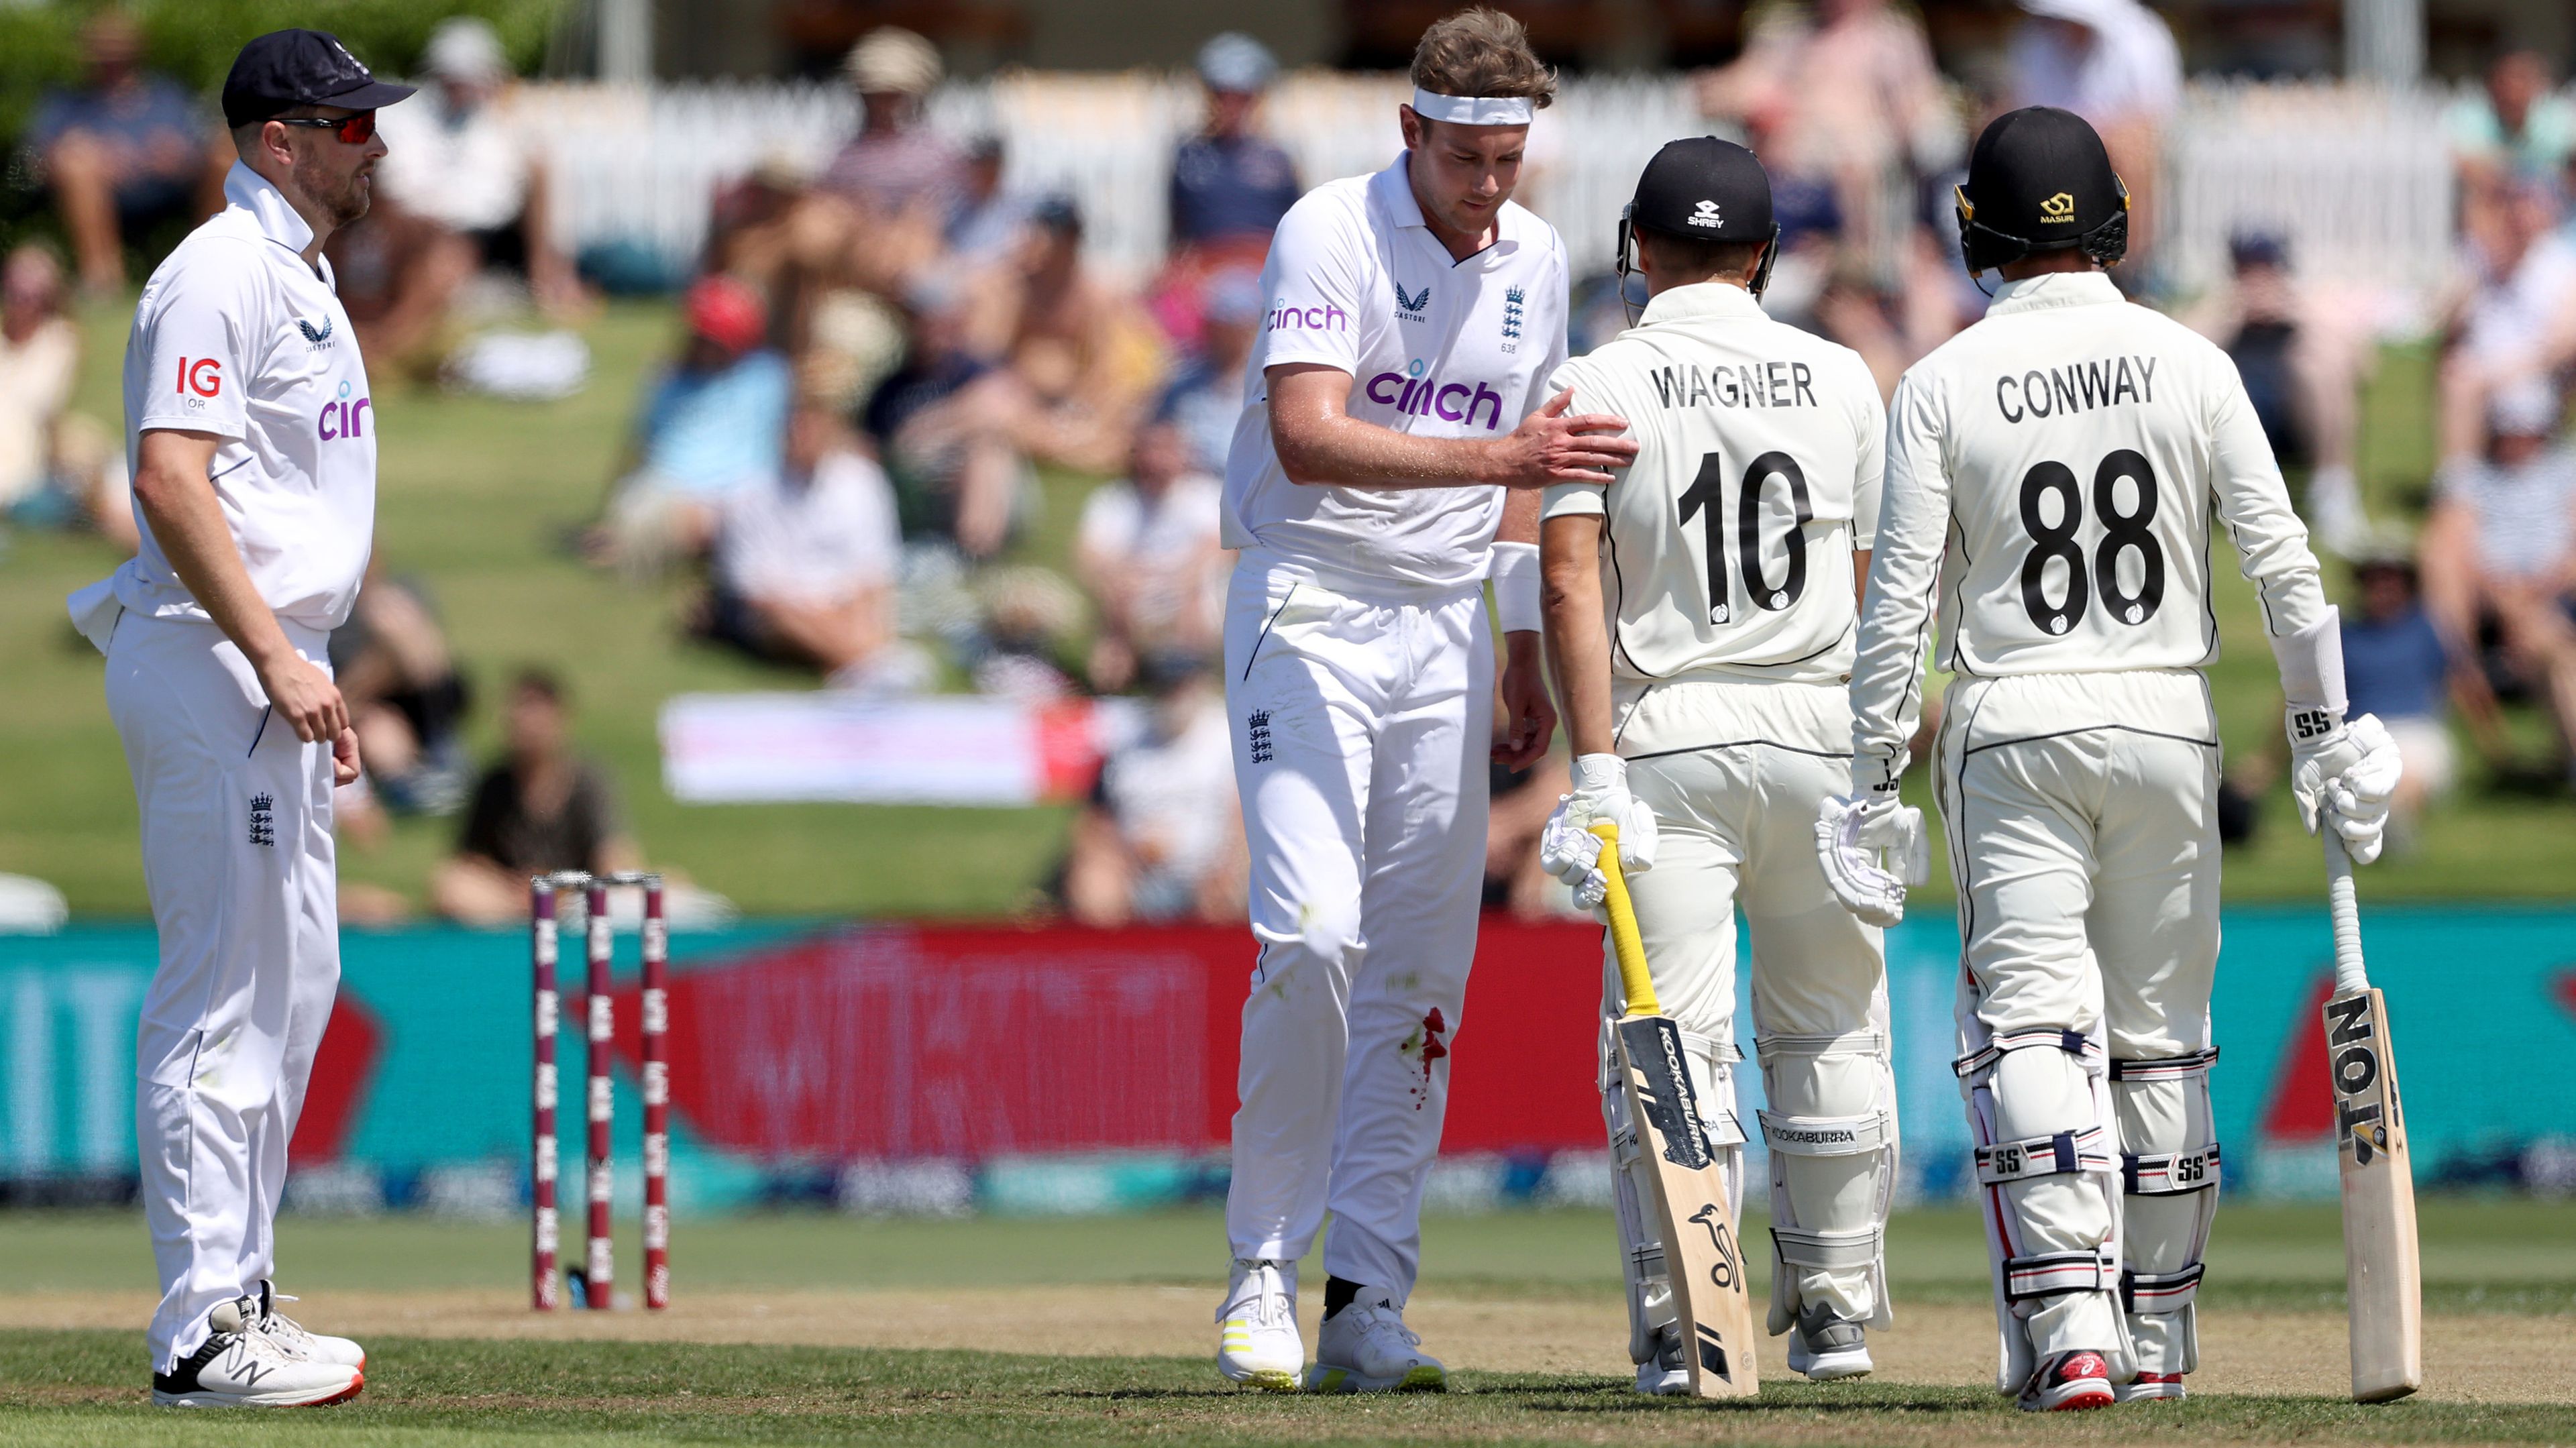 Stuart Broad pats Neil Wagner on the back after umpire Chris Gaffaney calls a no ball.